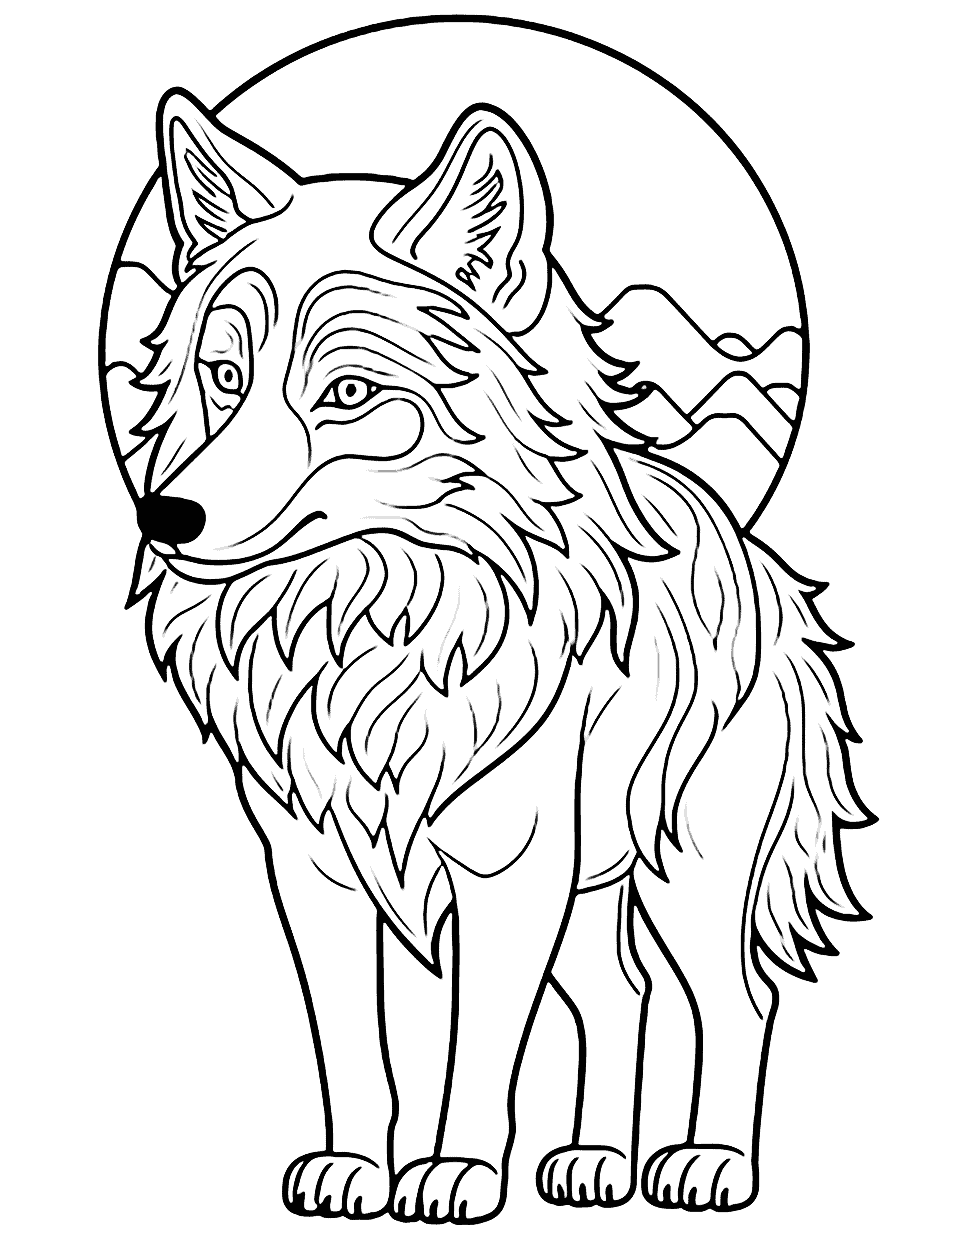 Wise Wolf Animal Coloring Page - A wise and majestic wolf with piercing eyes and a serene expression.